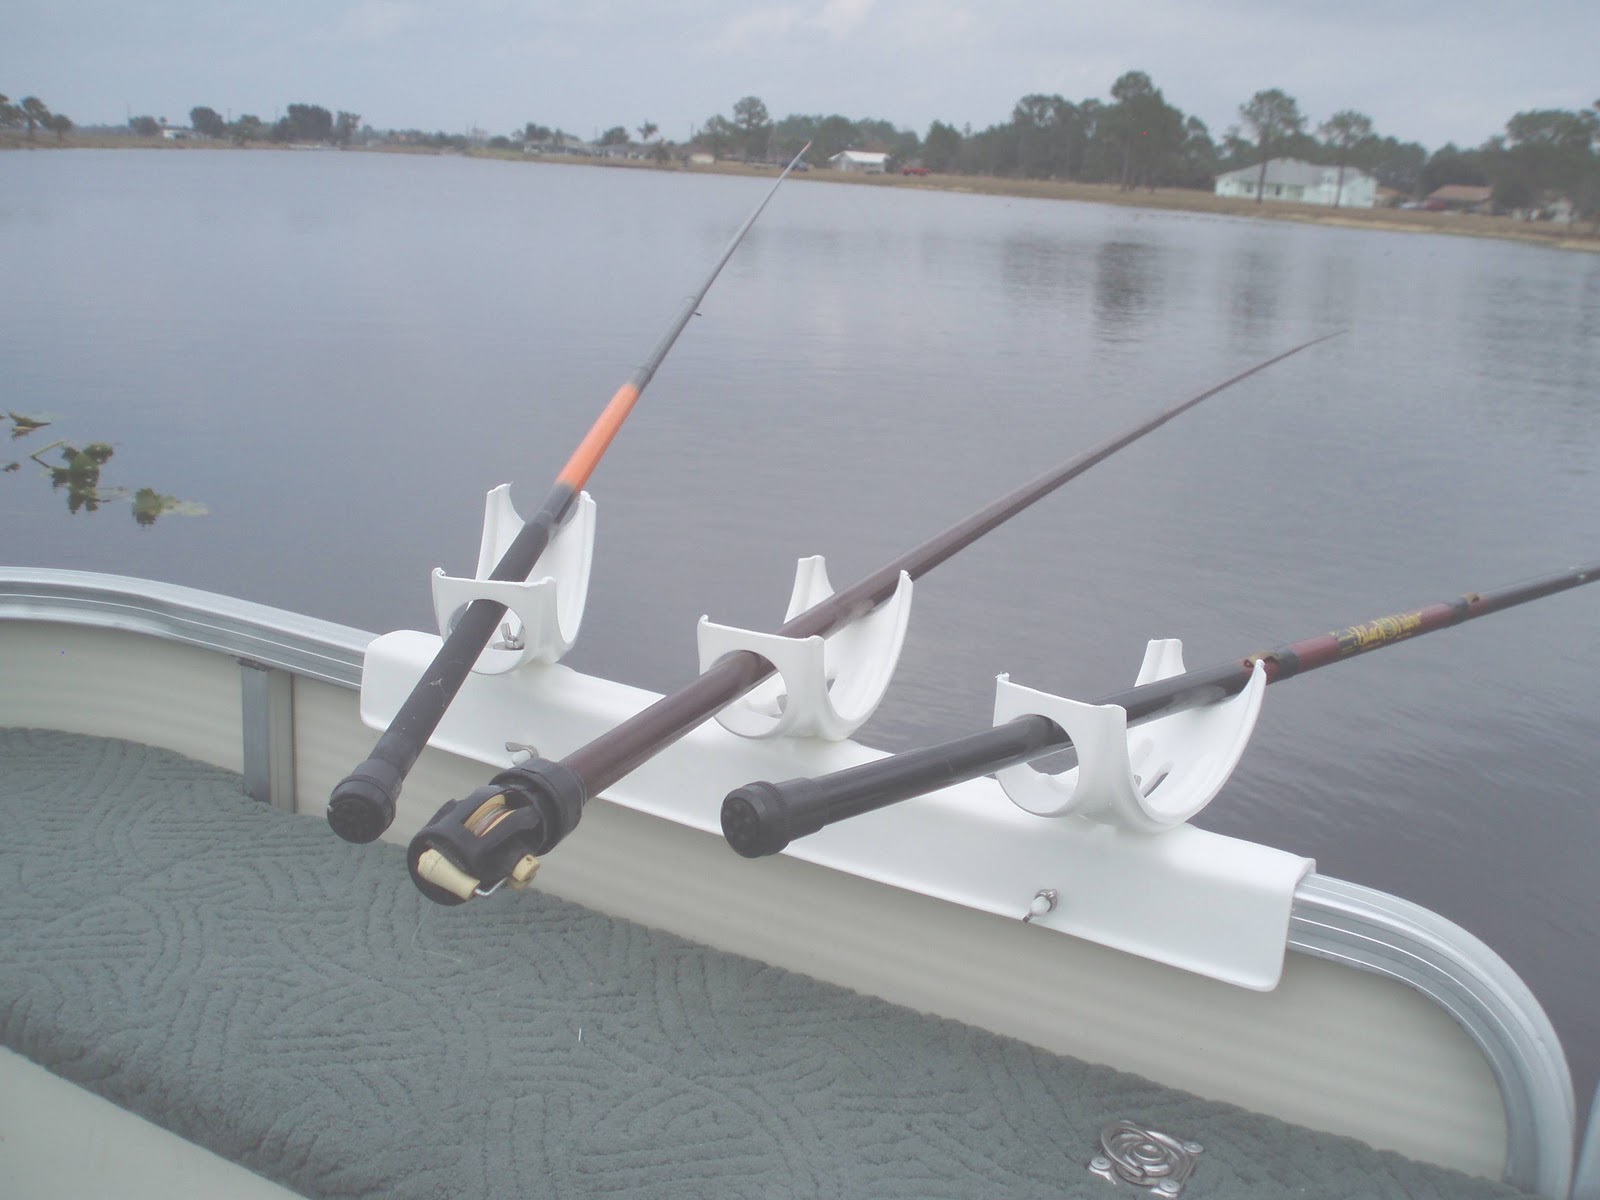 Crappie Rod Holders For Boats Pictures to Pin on Pinterest 